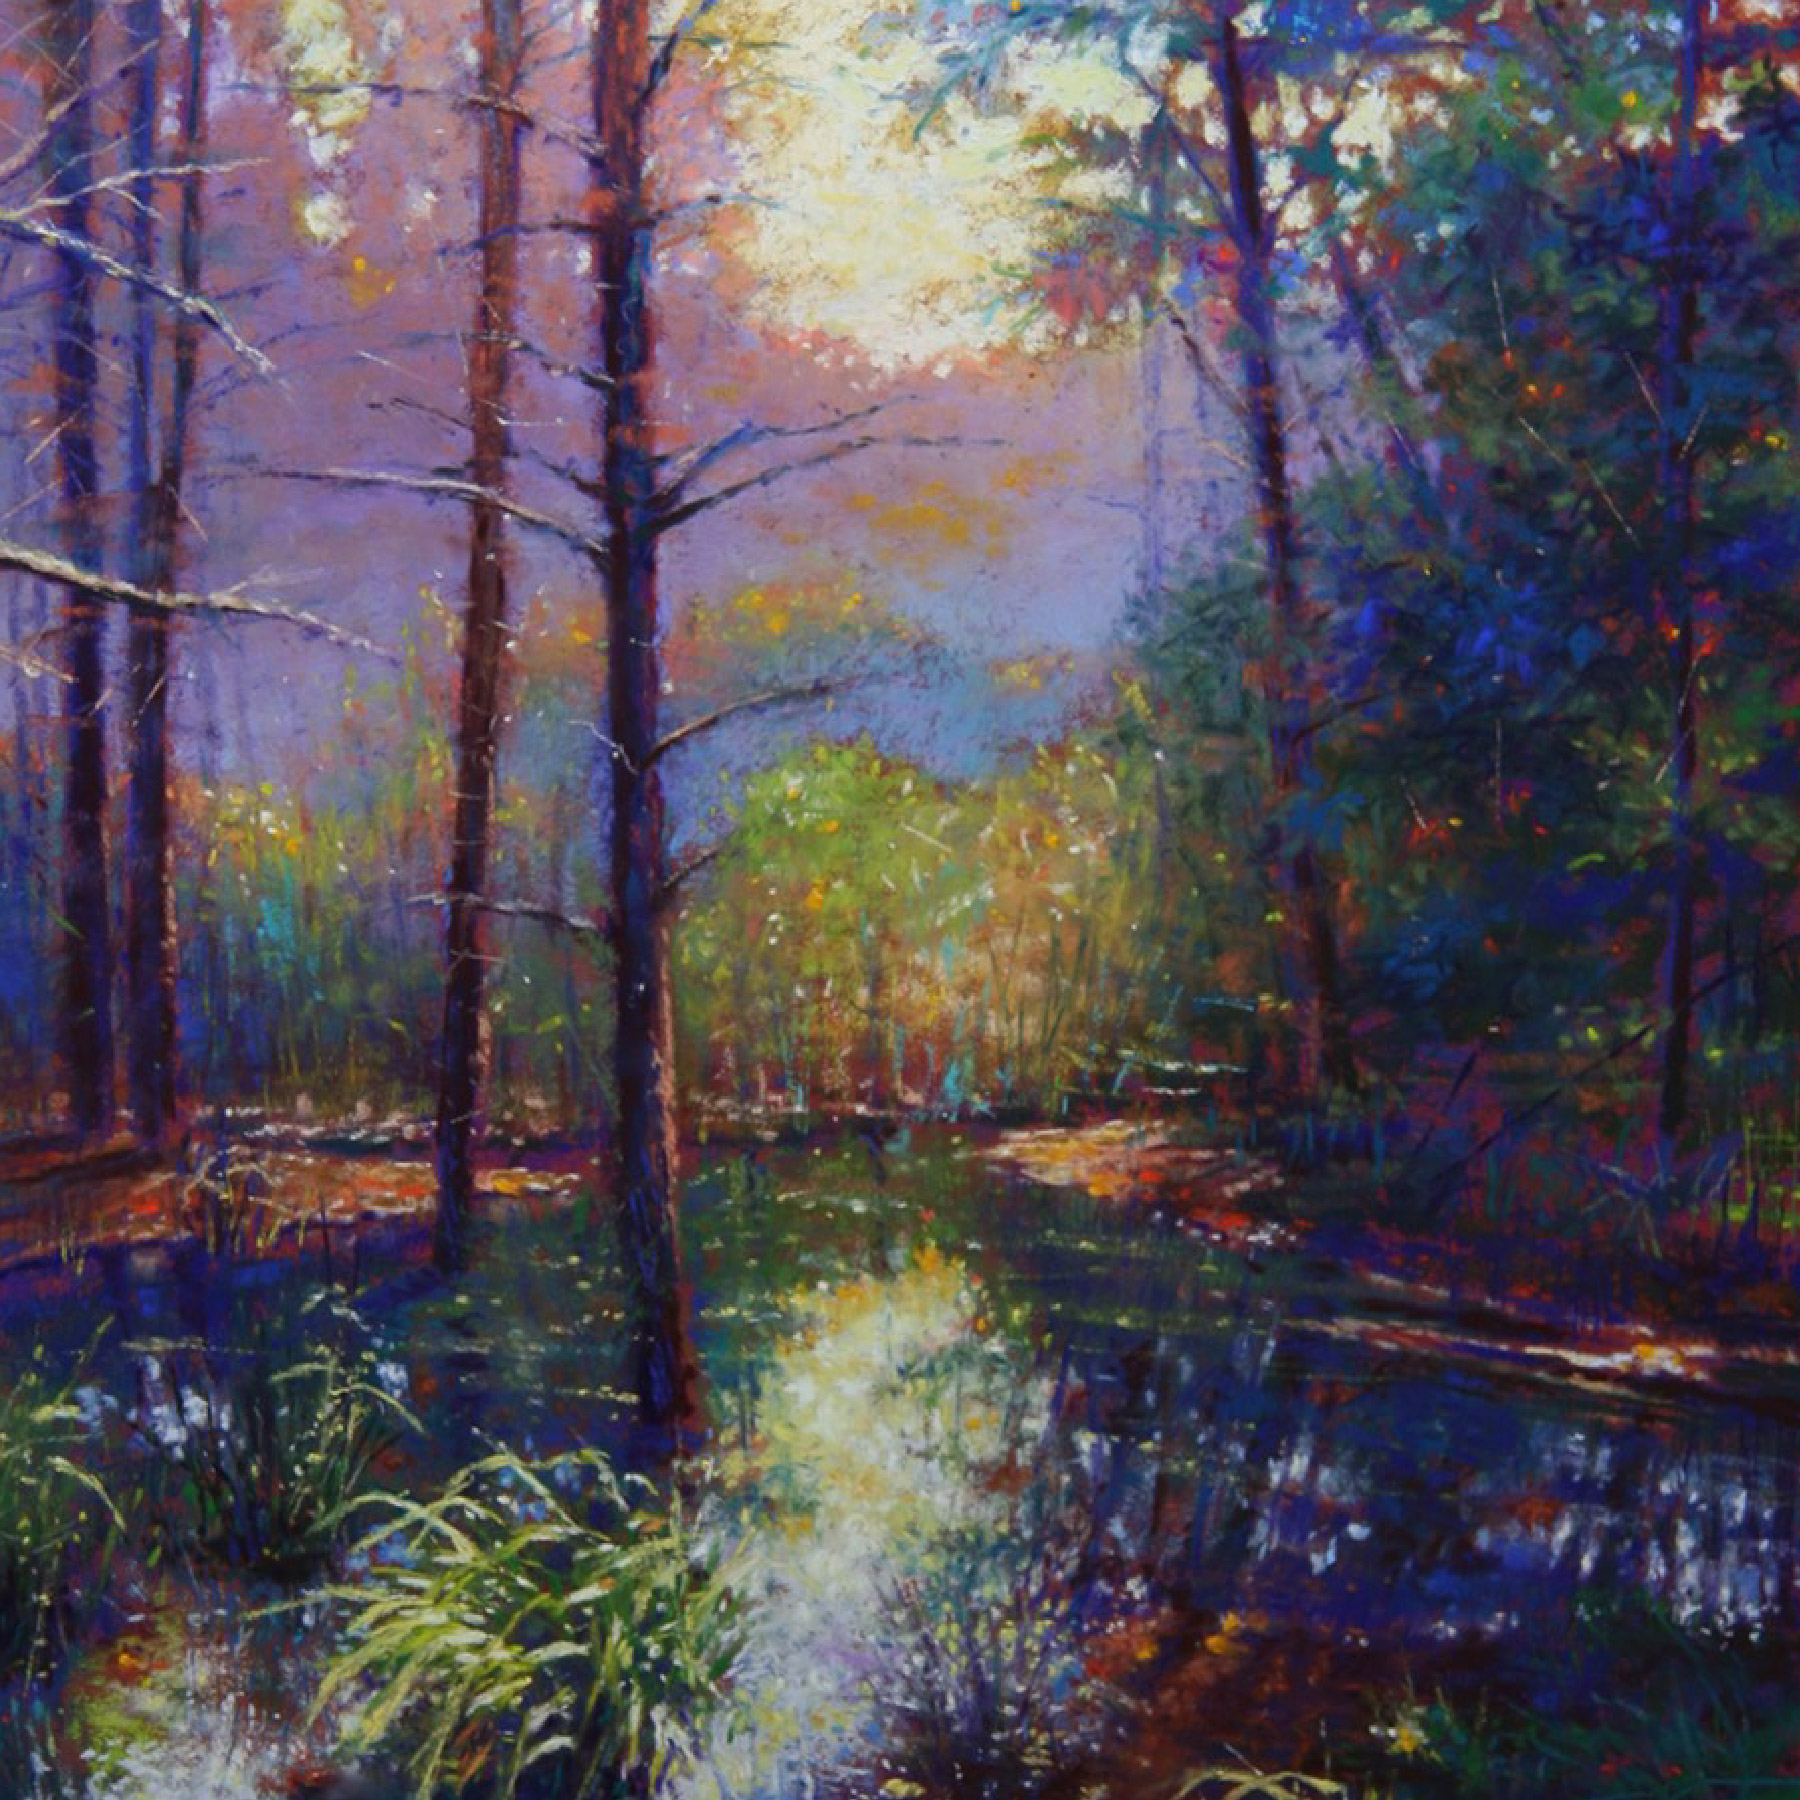 Forest made with pastels by Mike Kolasinski